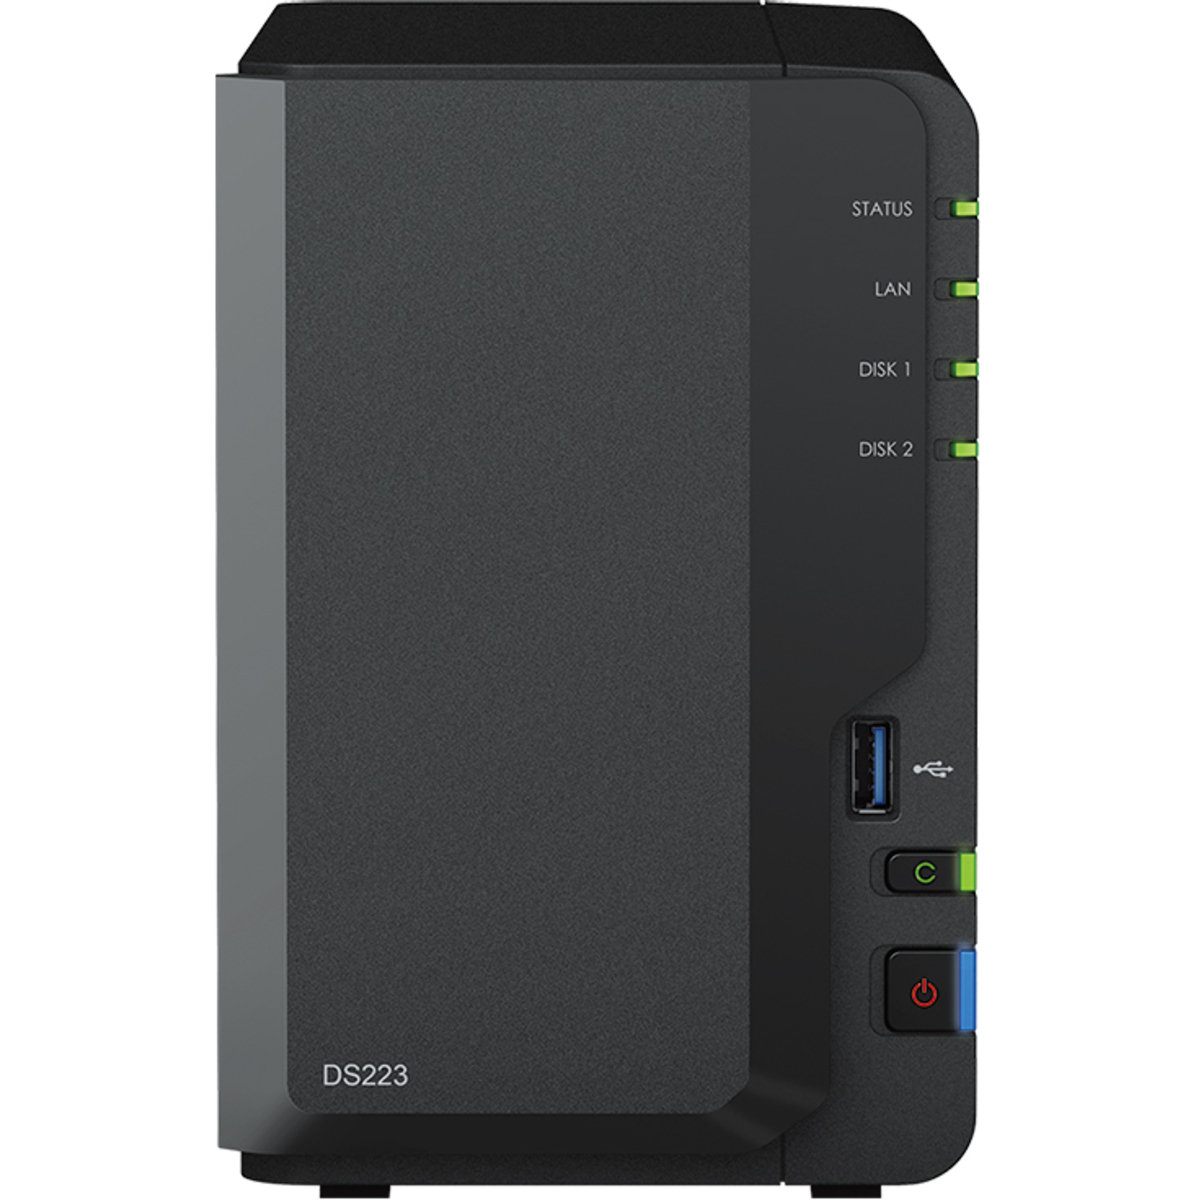 Synology DS223 NAS - Network Attached Storage Device Burn-In Tested Configurations